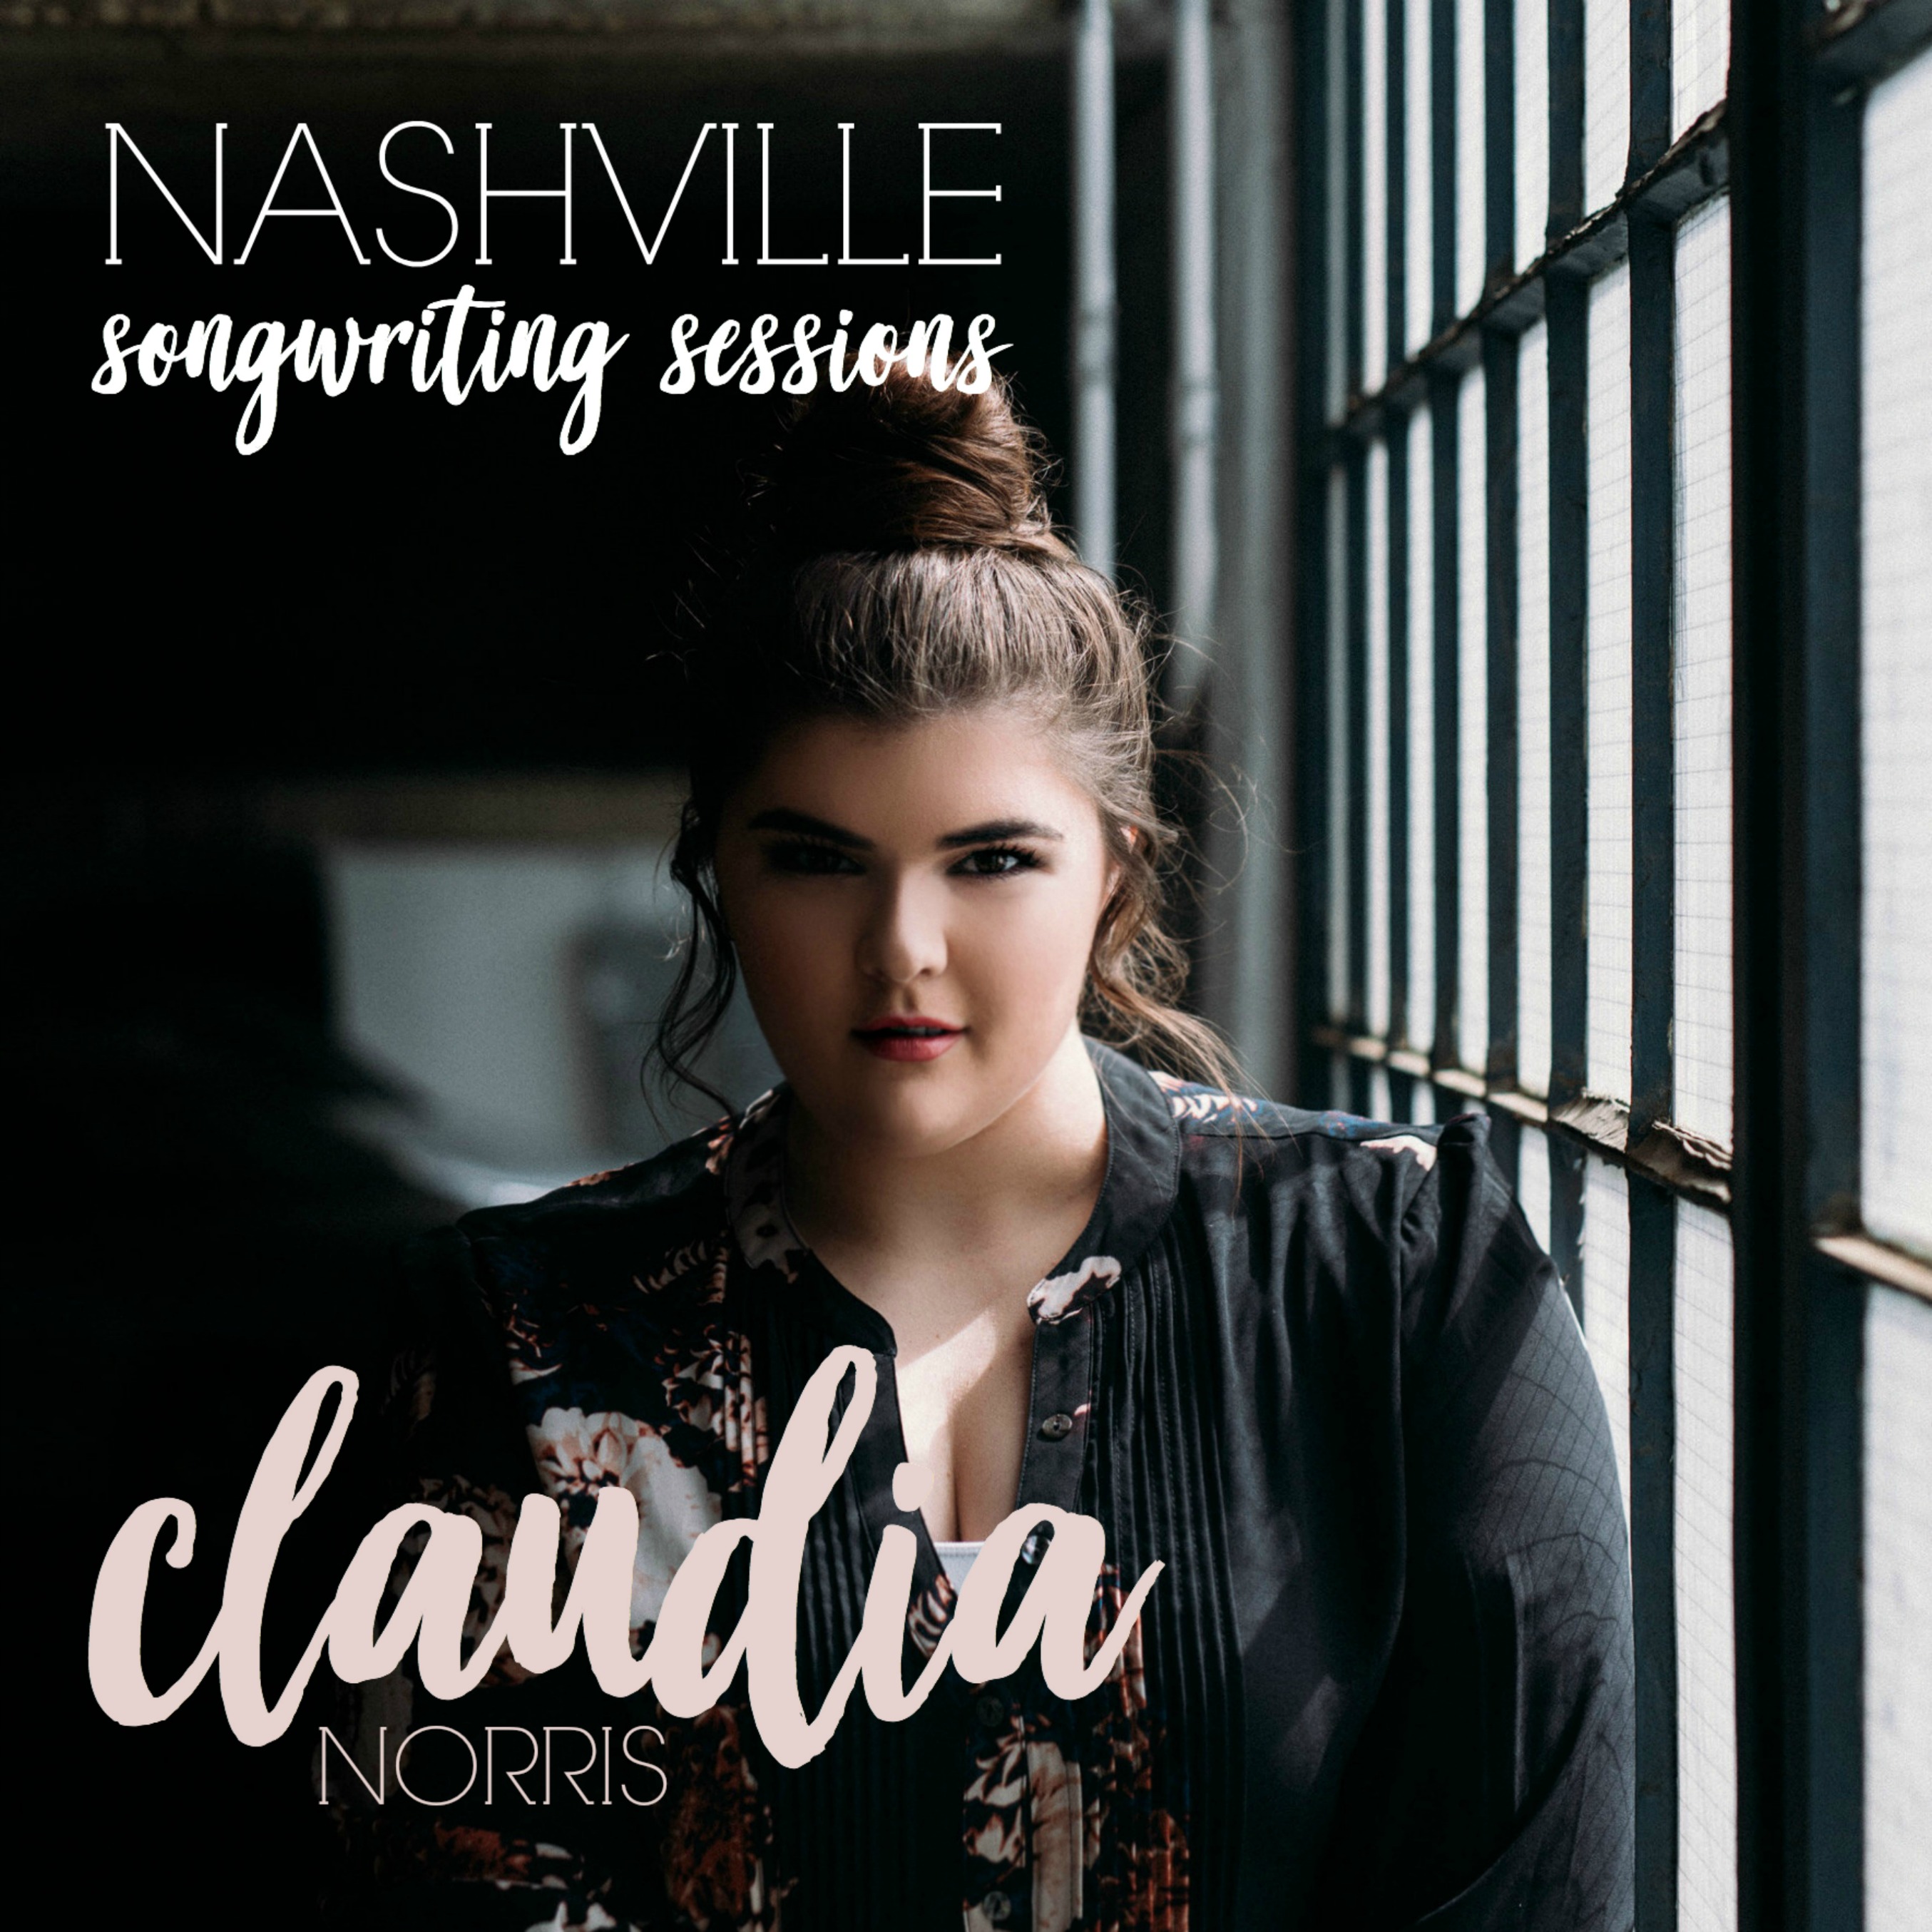 Nashville Songwriting Sessions - Claudia Norris